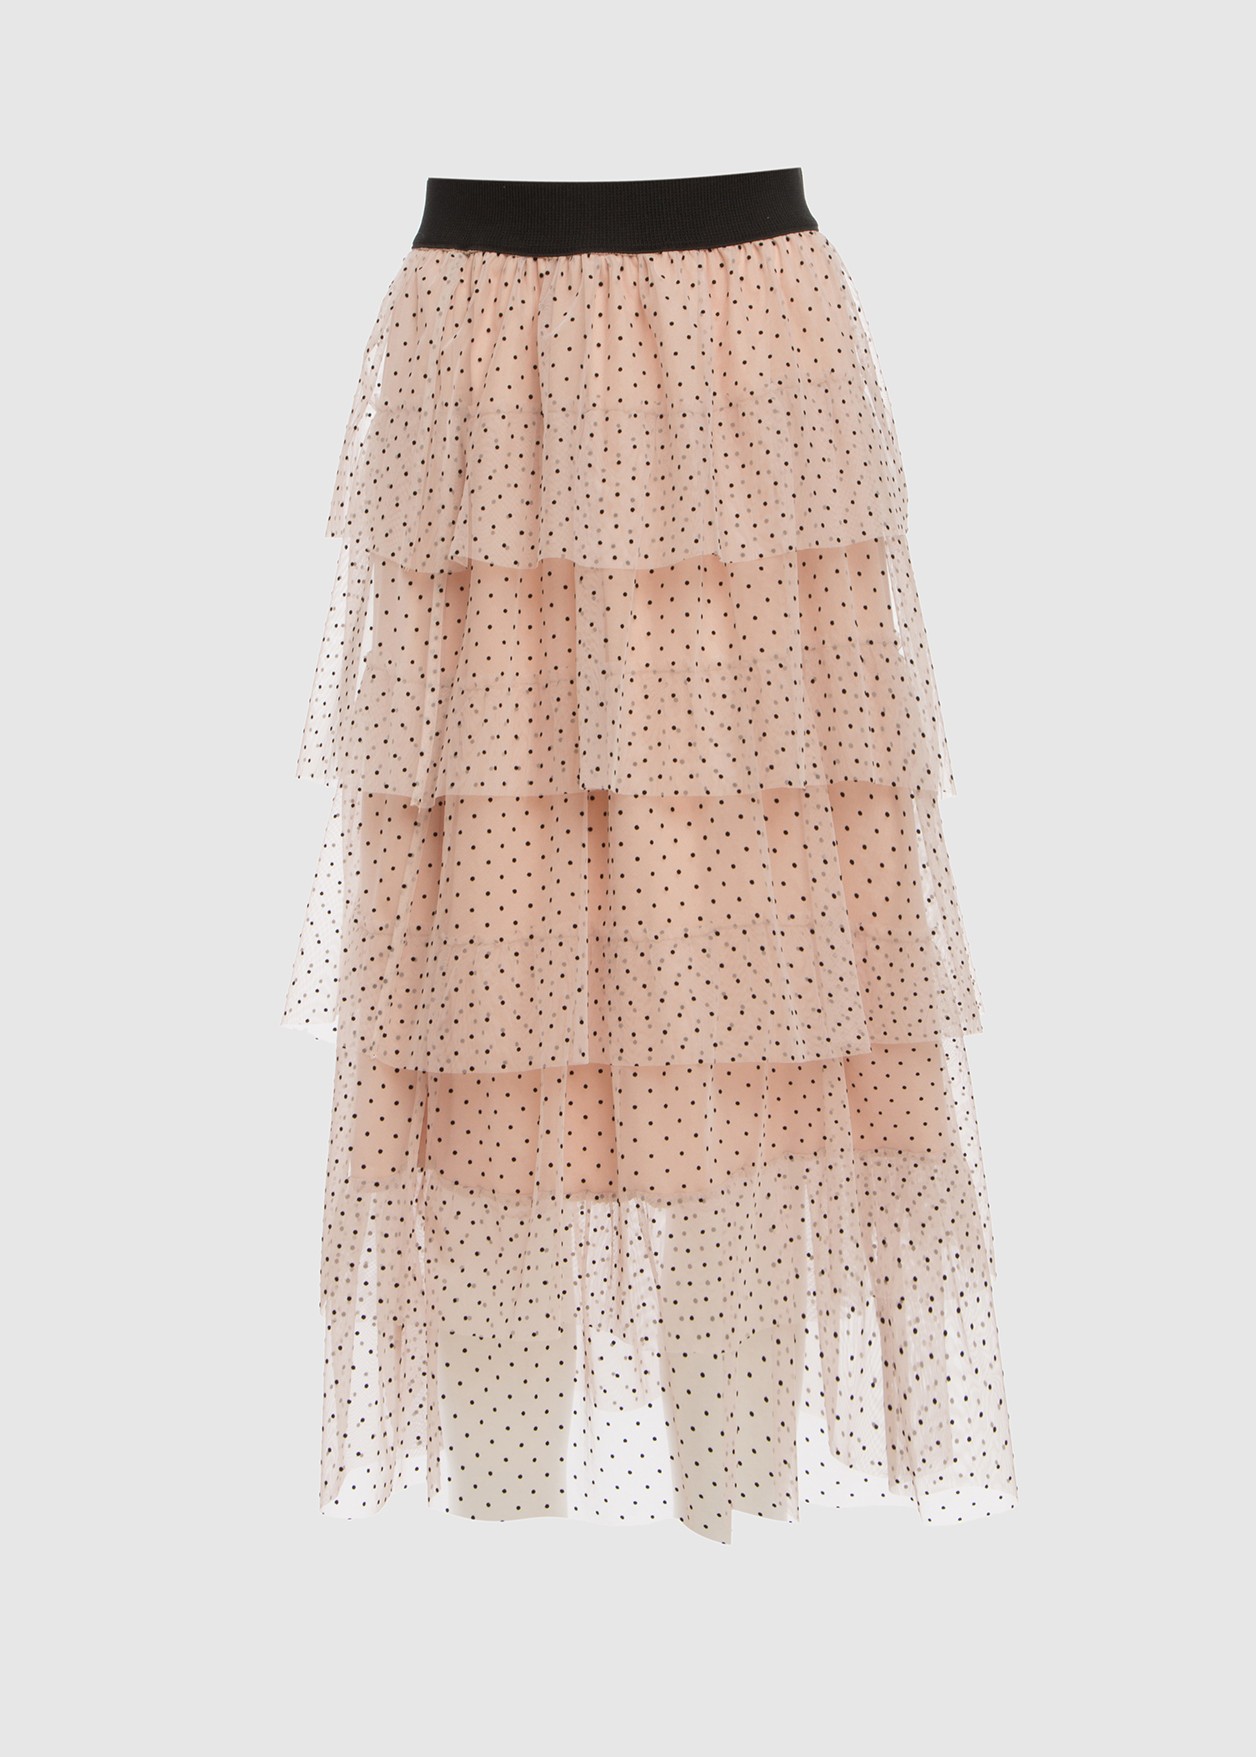 Dotted skirt with ruffles